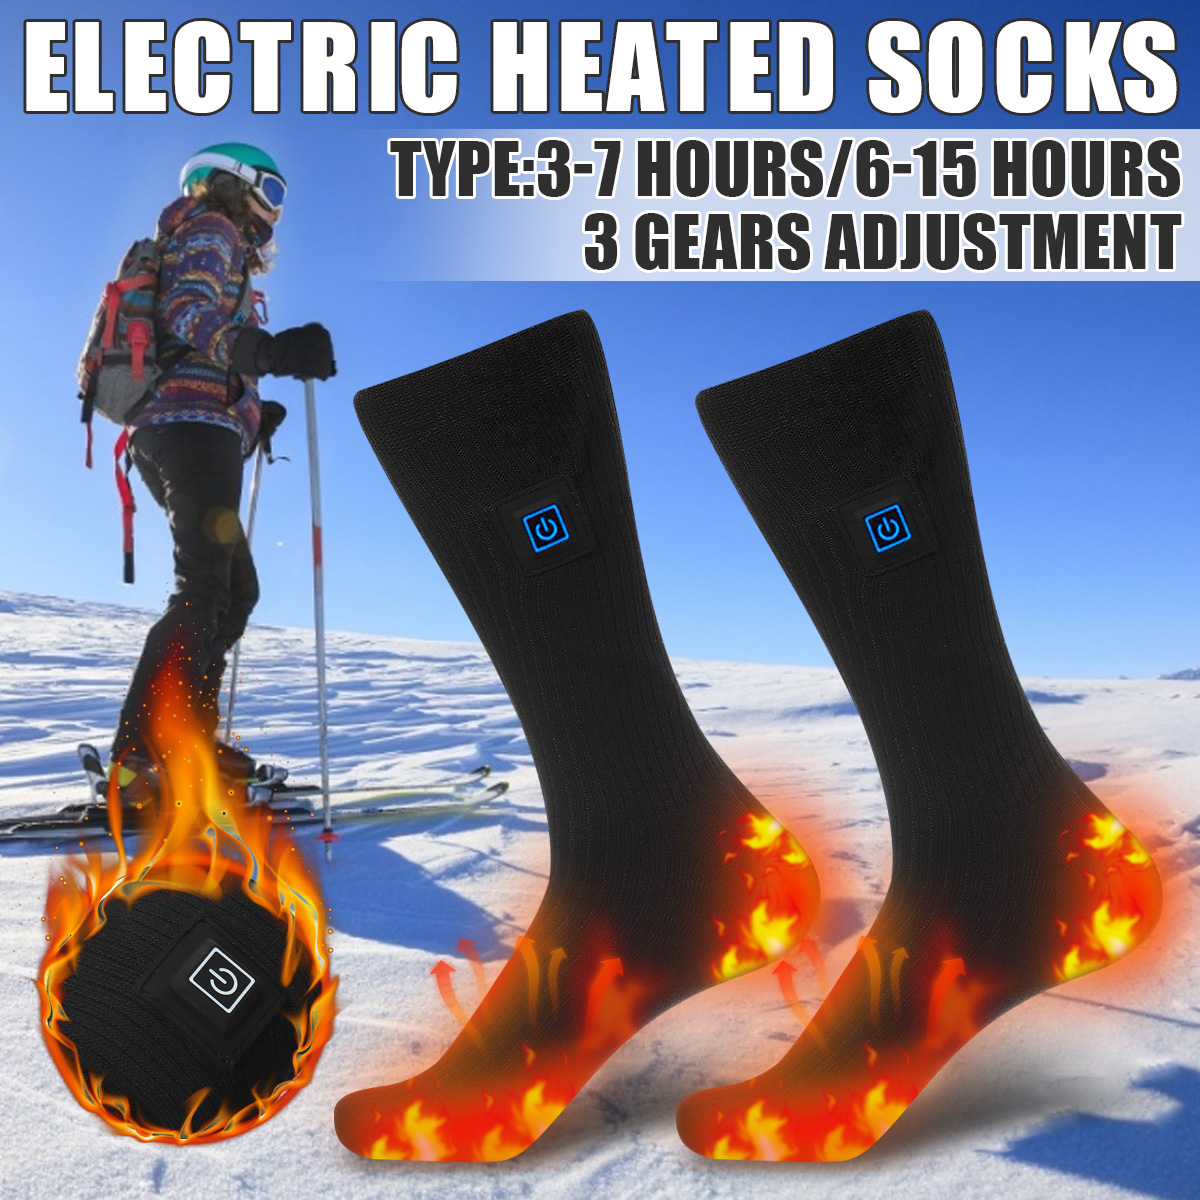 Electric-Heated-Socks-3-Gear-Adjustable-Temperature-Rechargeable-Feet-Warmer-110-220V-1577508-1